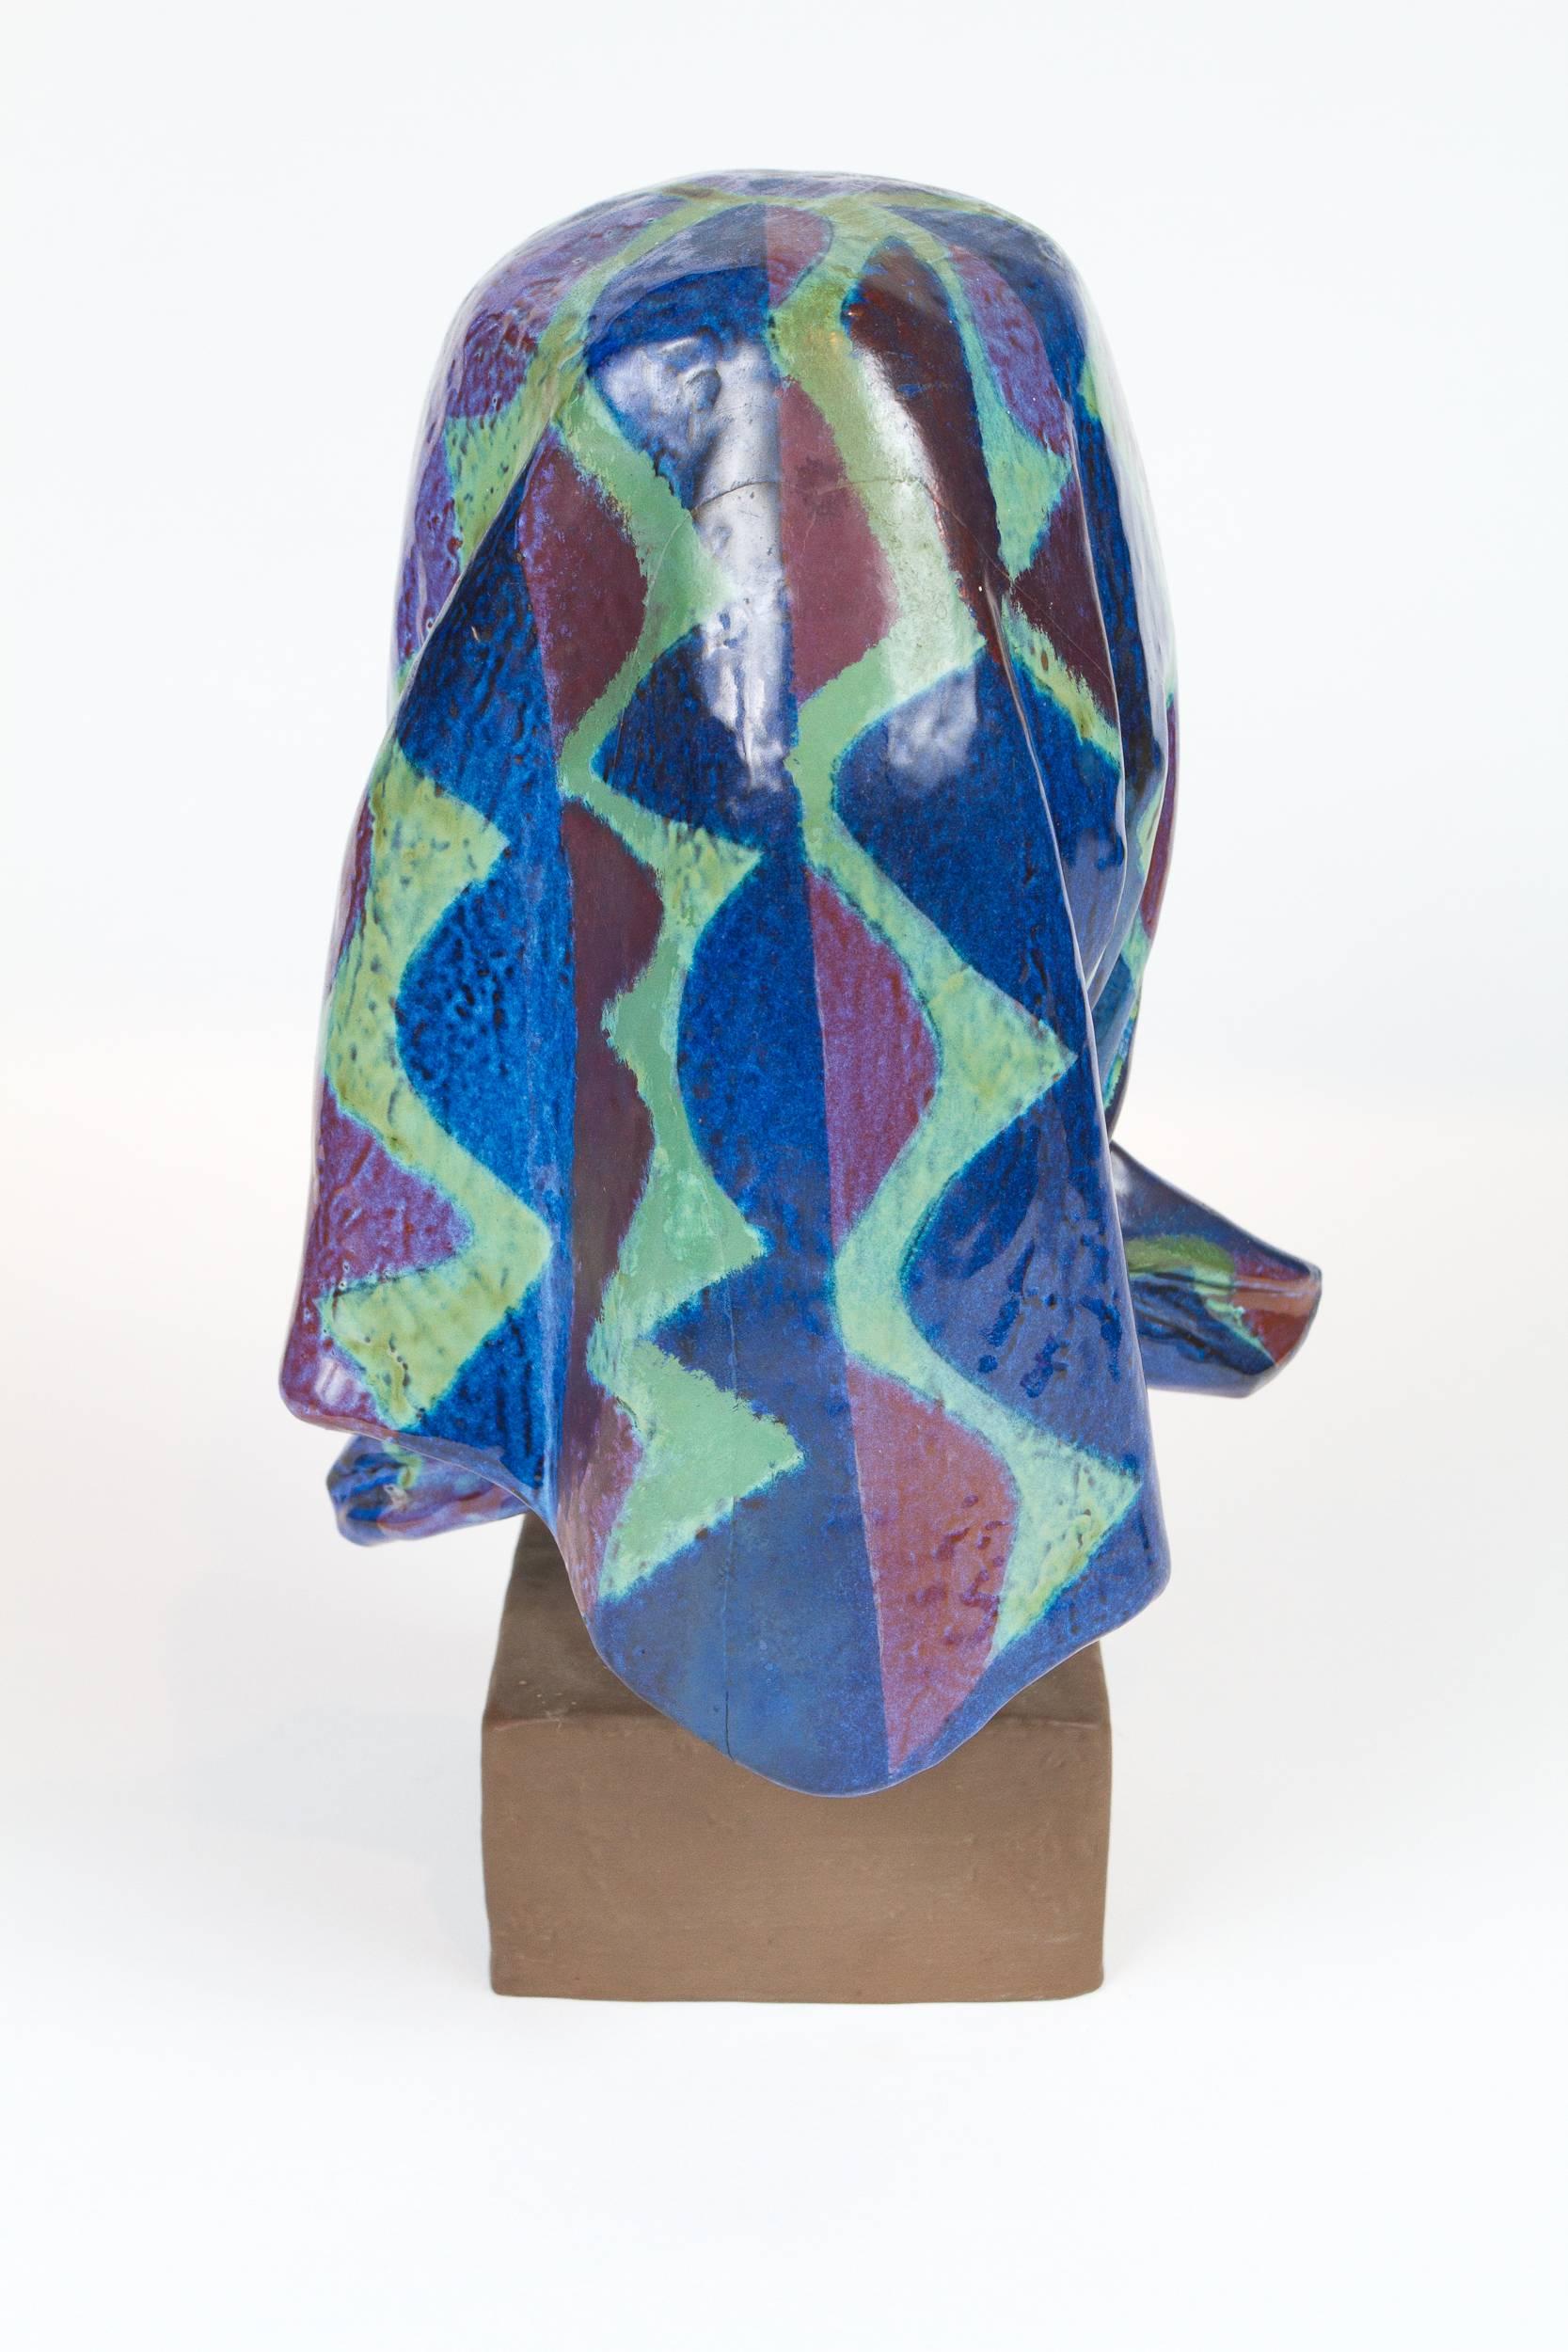 Danish Ceramic Sculpture of a Woman Wearing Colored Scarf by Johannes Hedegaard For Sale